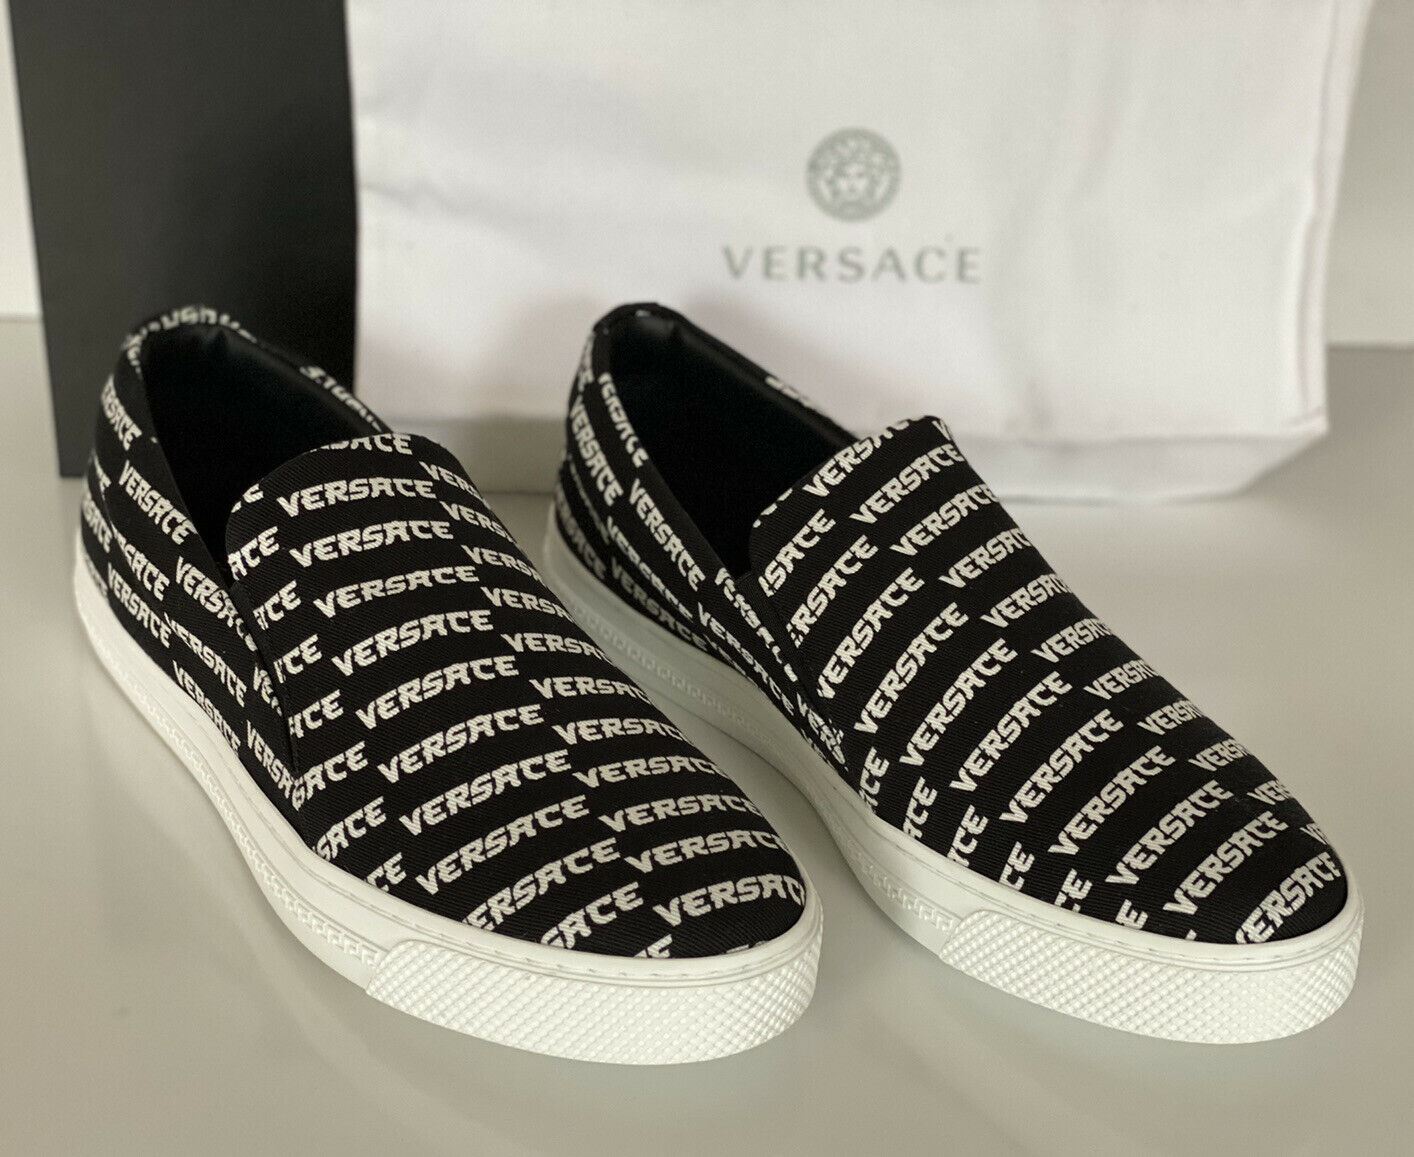 NIB VERSACE Mens Black and White Nylon Sneakers 11 US (44 Eu) Made in Italy